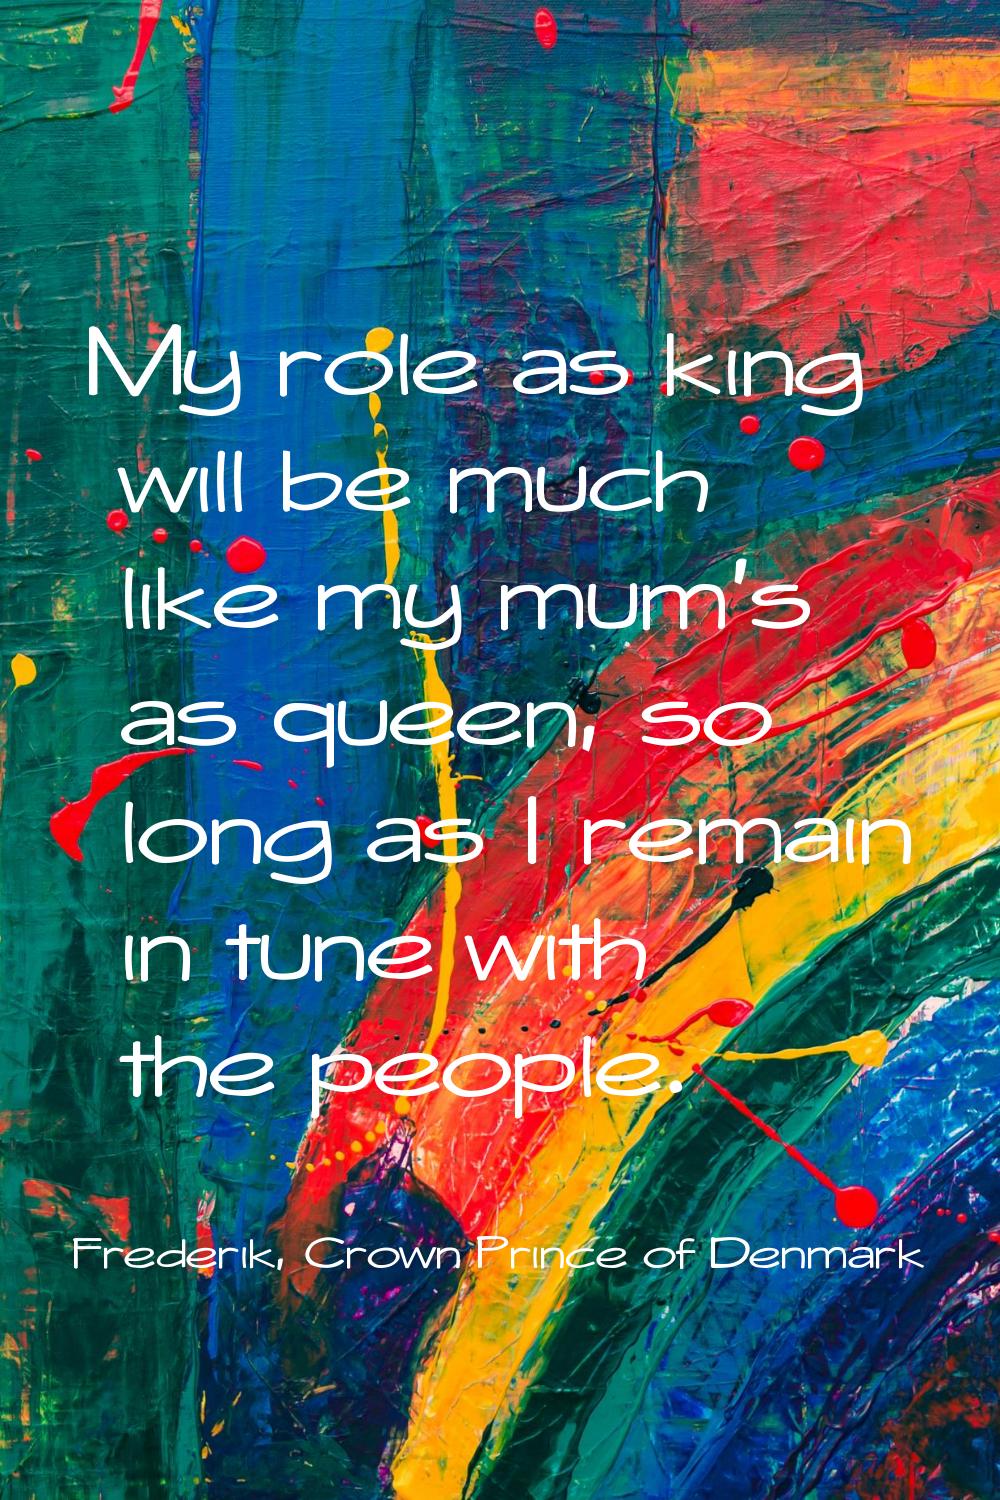 My role as king will be much like my mum's as queen, so long as I remain in tune with the people.